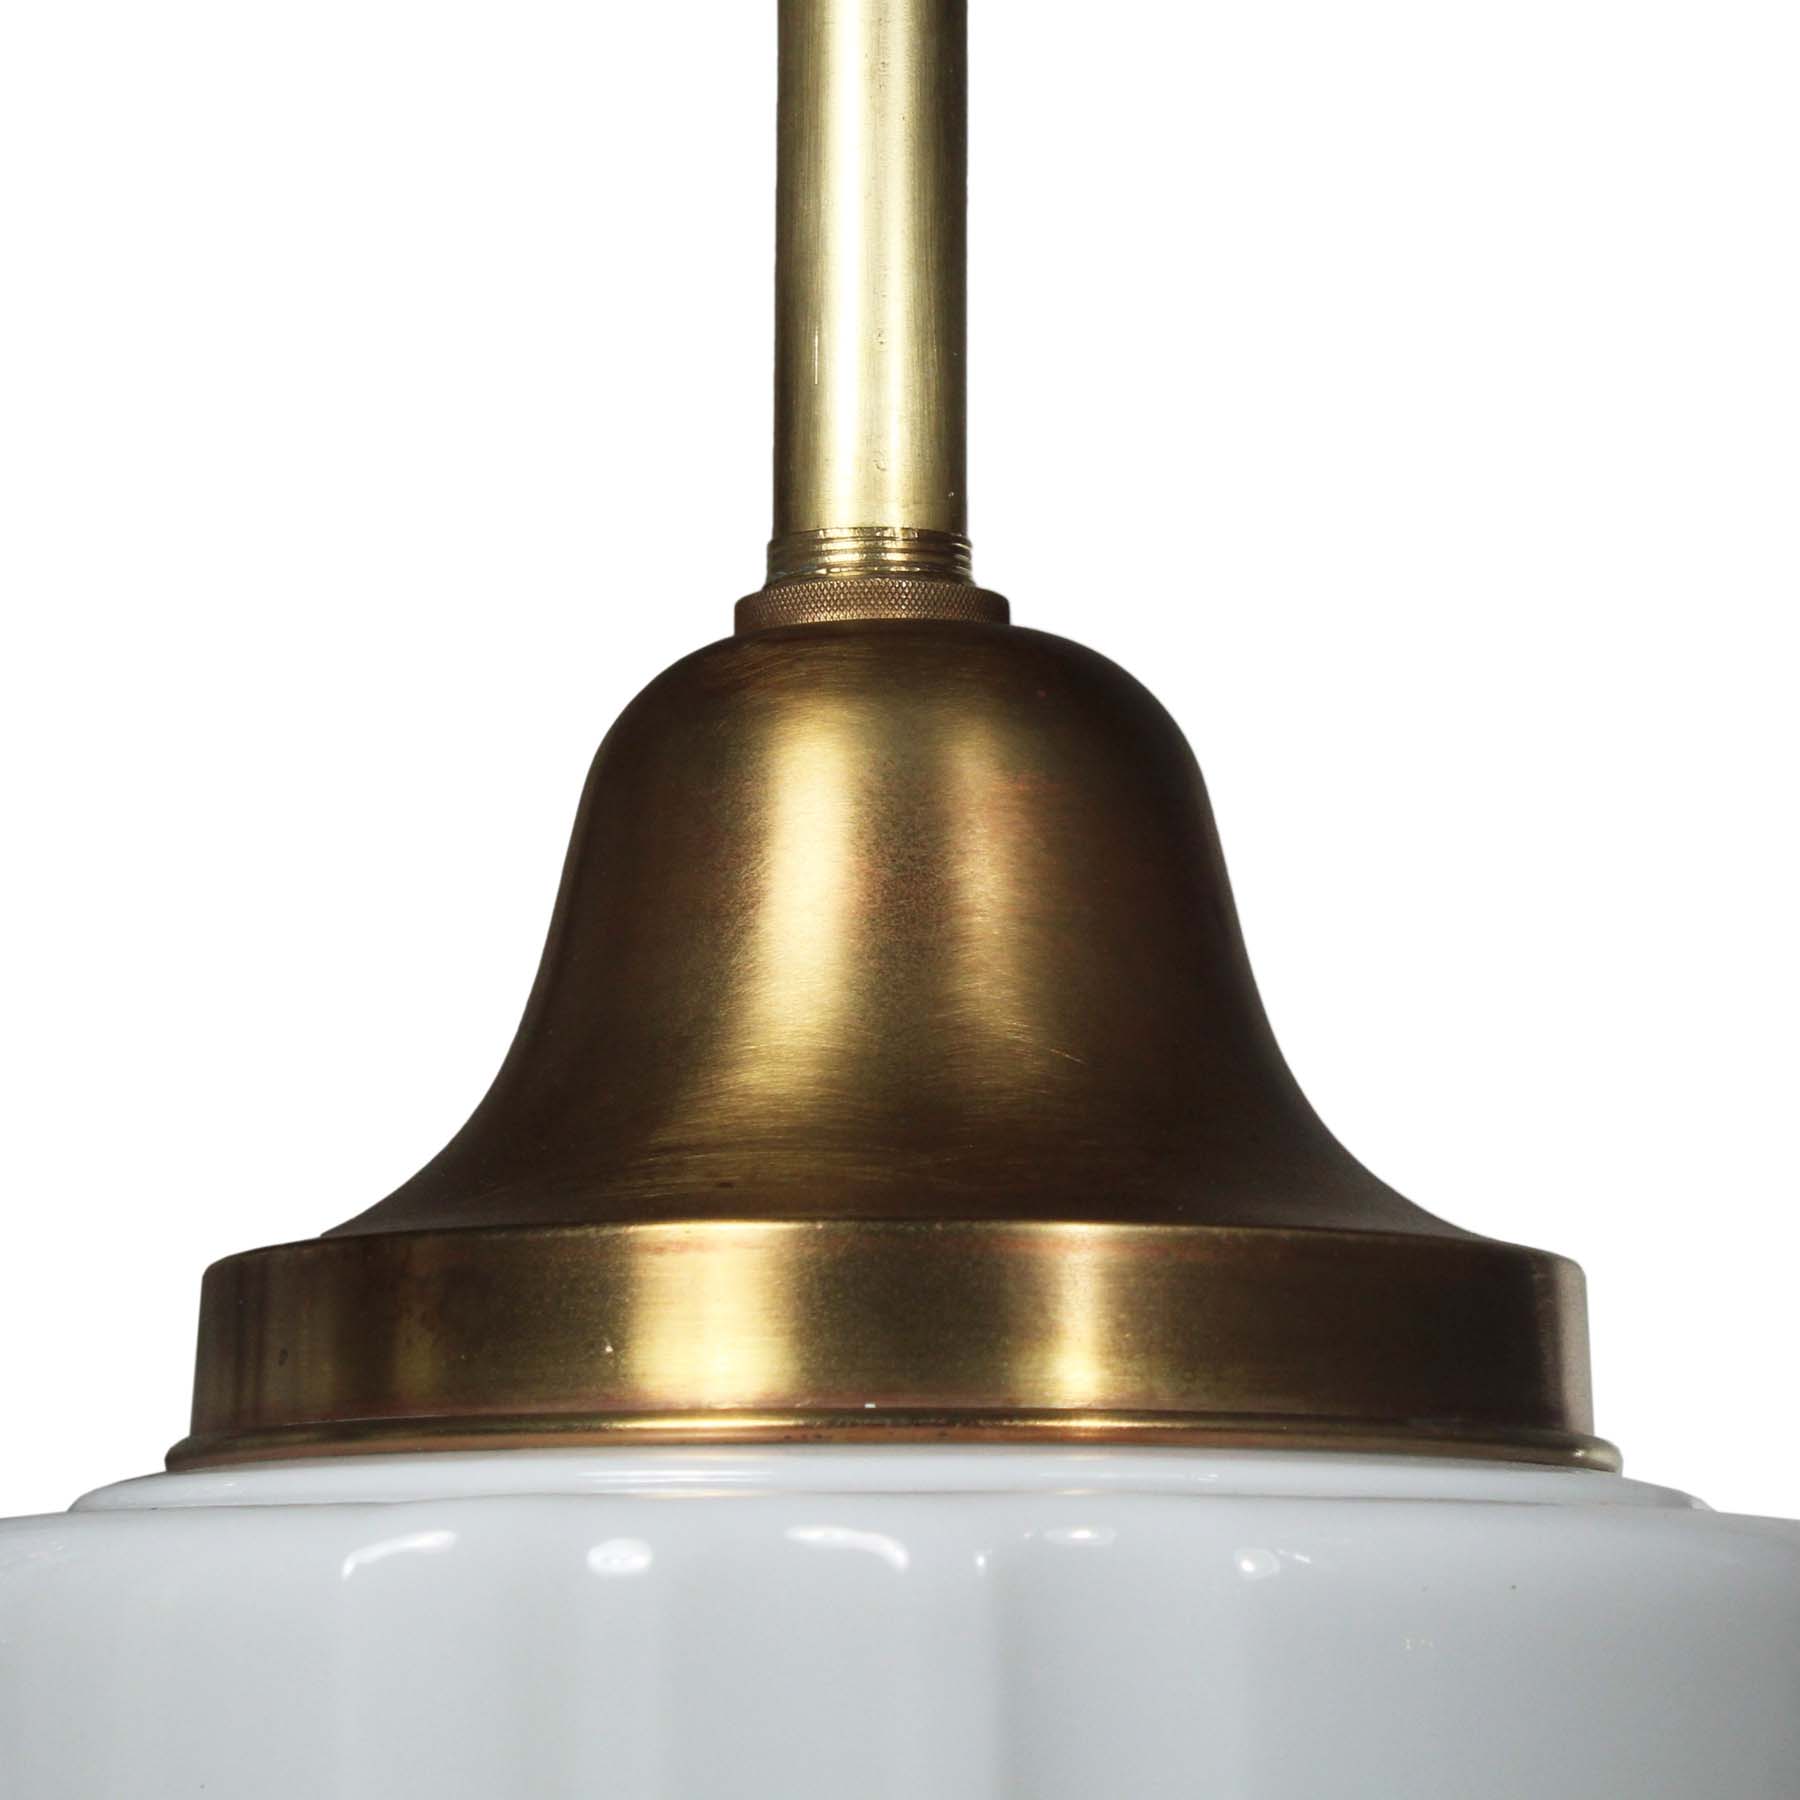 SOLD Antique Brass Art Deco Skyscraper Pendant Lights with Two-Part Prismatic Shade-69469